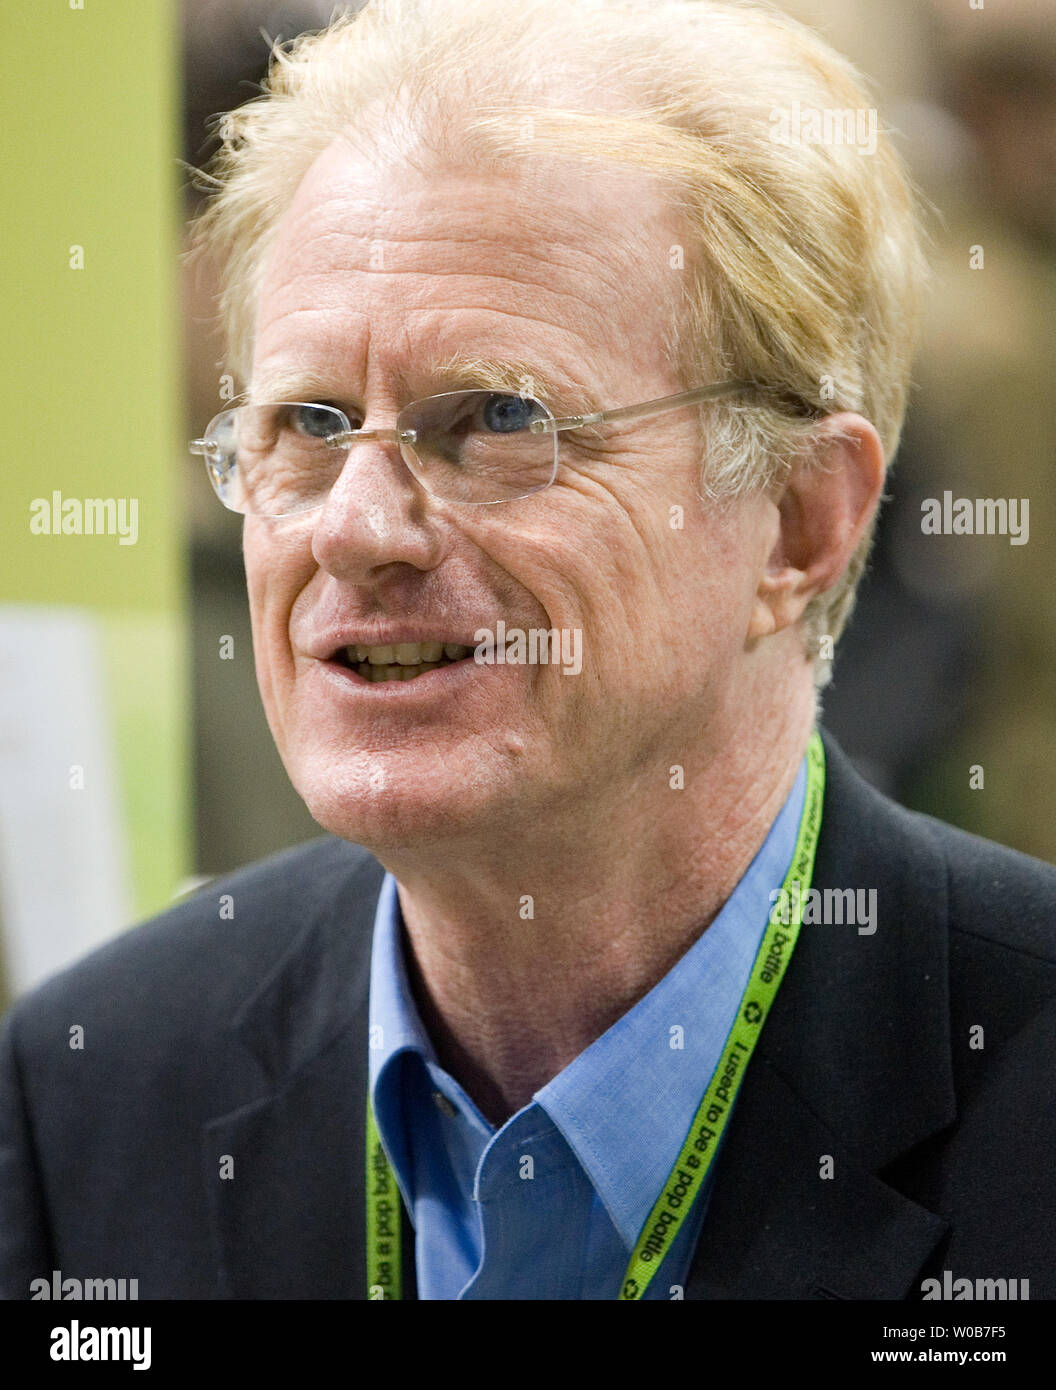 Actor and activist Ed Begley Jr. signs copies of his new book "Living Like Ed: A Guide to the Eco-Friendly Life" after giving a talk about simple everyday things he's done which are environmentally friendly as well as economical at the inaugural Green Living Show at BC Place in Vancouver, British Columbia on March 1, 2008. The show runs through the weekend.  (UPI Photo / Heinz Ruckemann) Stock Photo